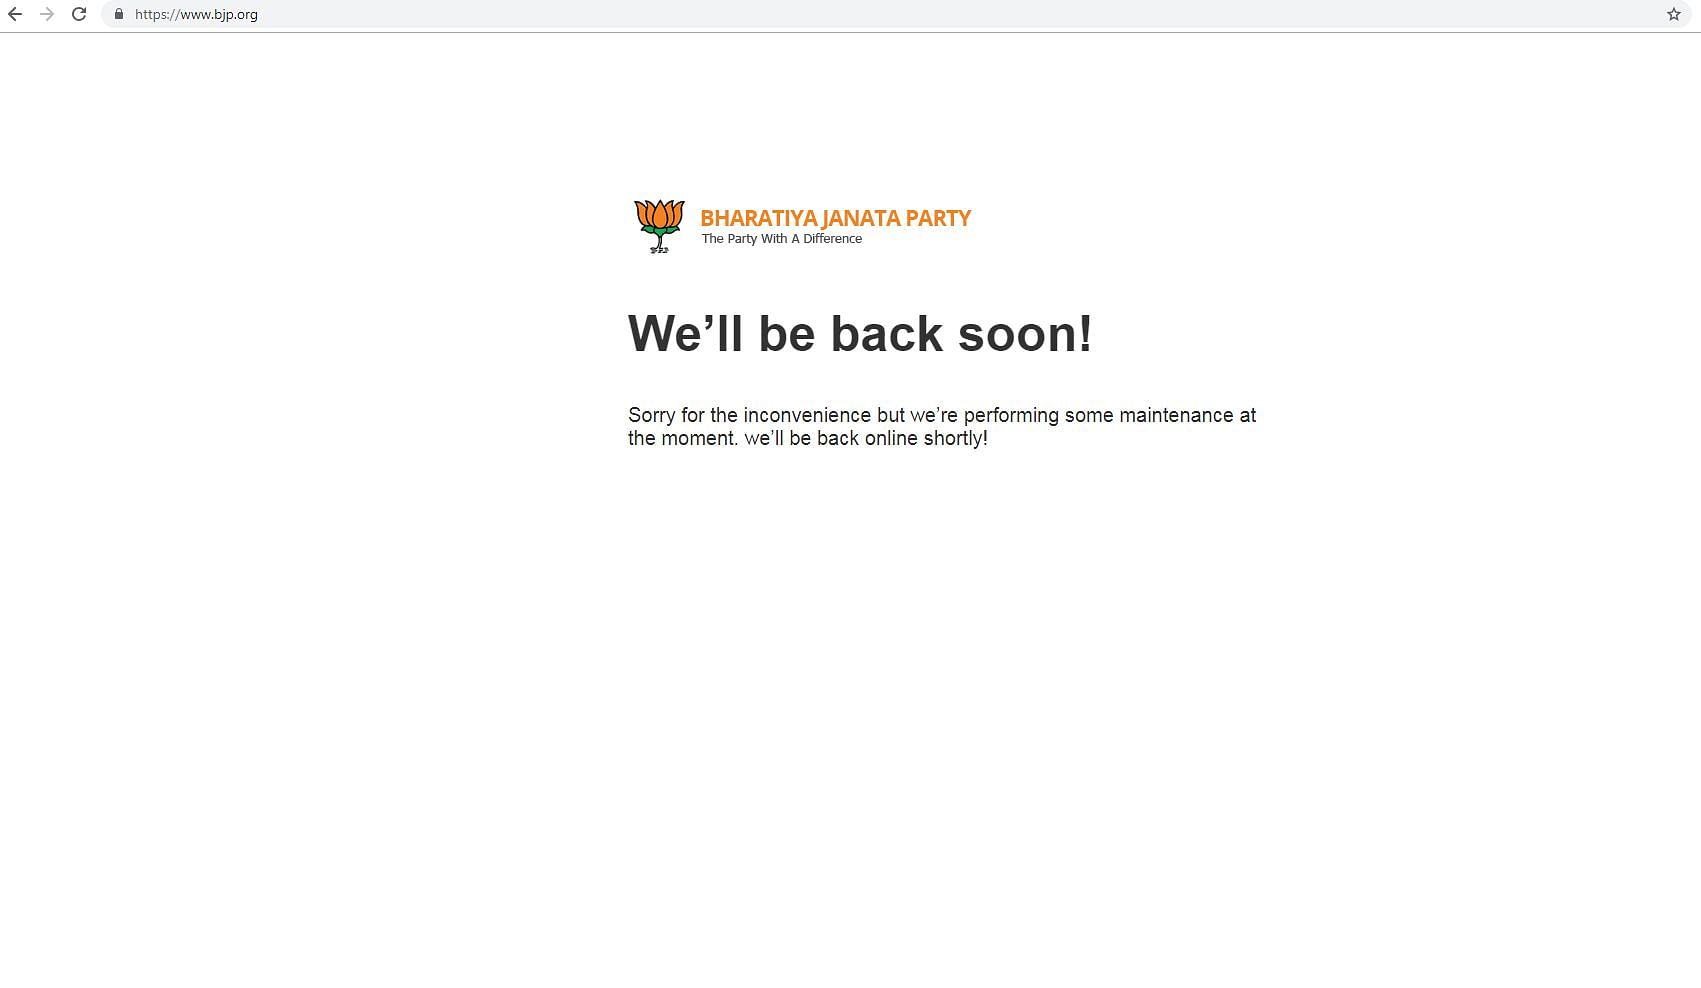 A screen grab of the Bharatiya Janata Party (BJP) website which was taken offline after the hackers allegedly defaced the site on March 5, 2019.